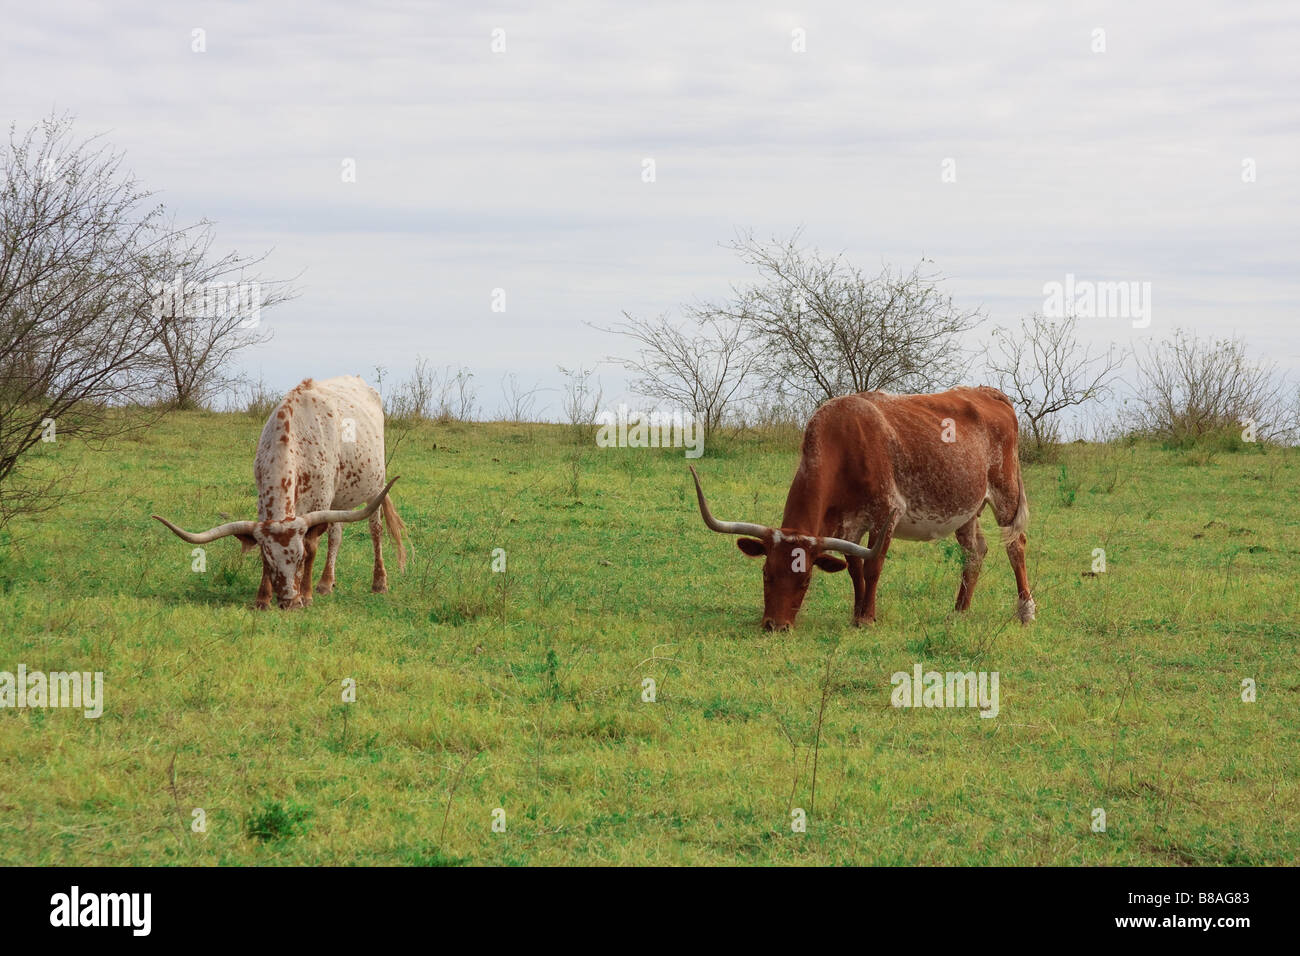 Two Texas Longhorns grazing in a field. Stock Photo